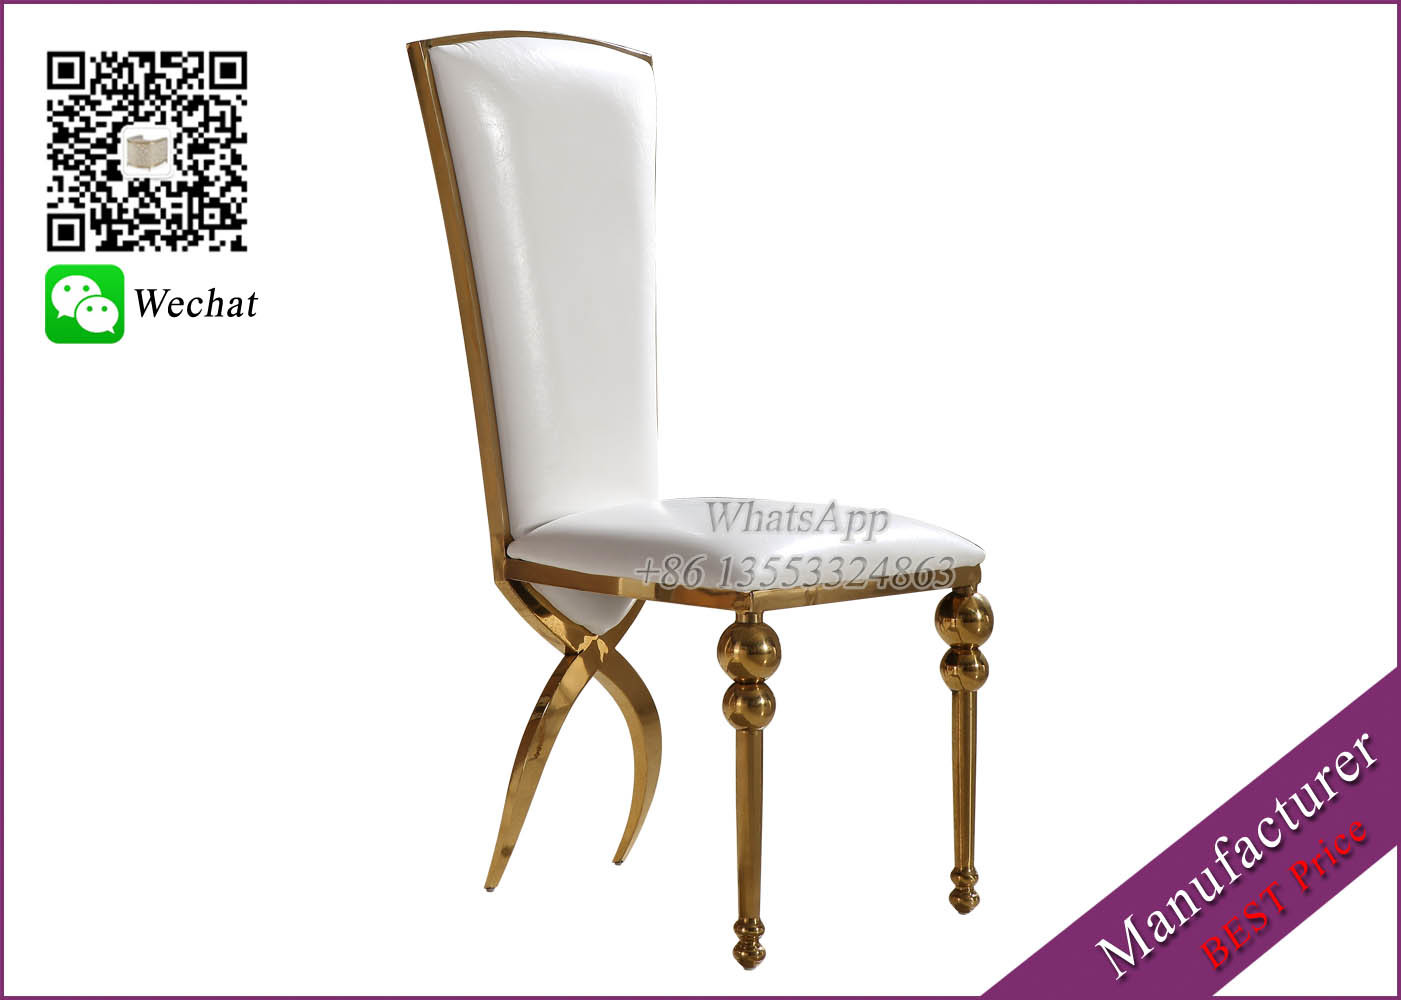 White Cushion Wedding Chairs For Sale With Good Quality (YS-16)